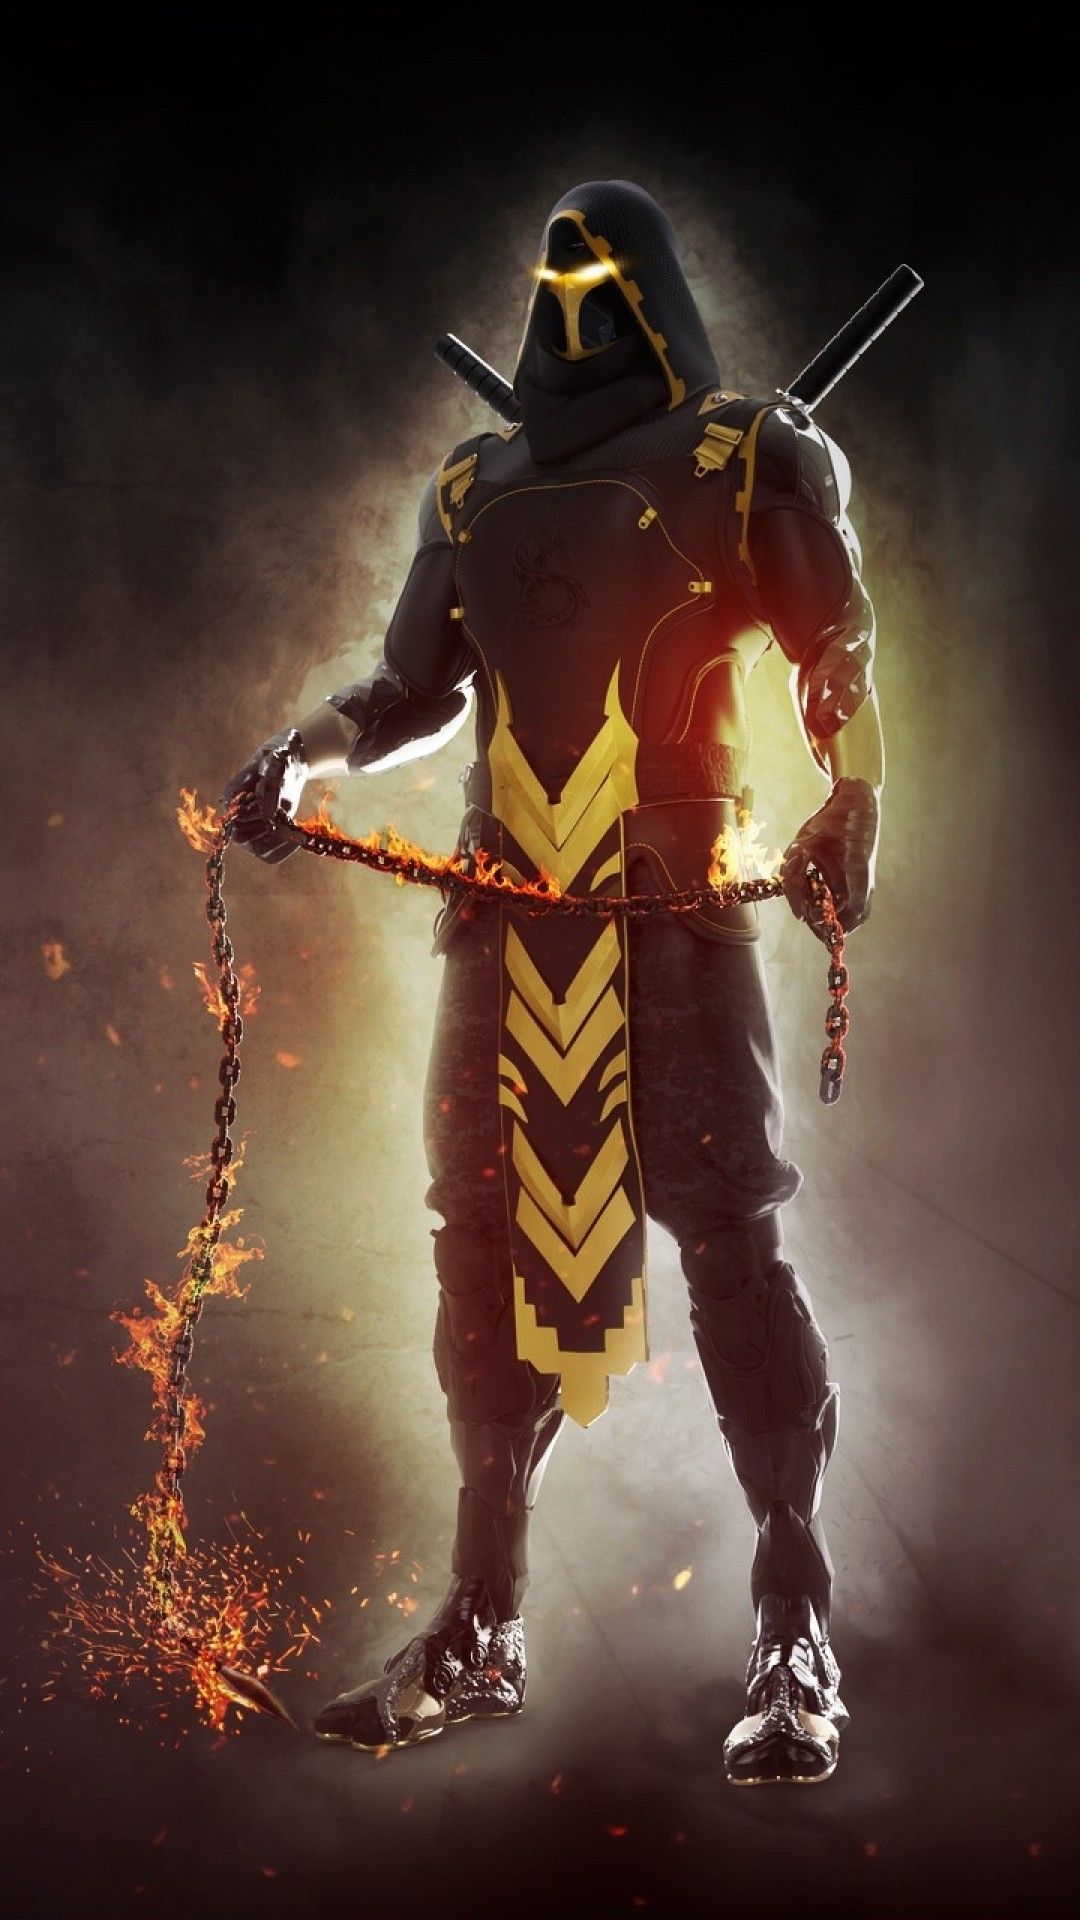 Download 1080x1920 Mortal Kombat, Scorpion Wallpaper for iPhone iPhone 7 Plus, iPhone 6+, Sony Xperia Z, HTC One